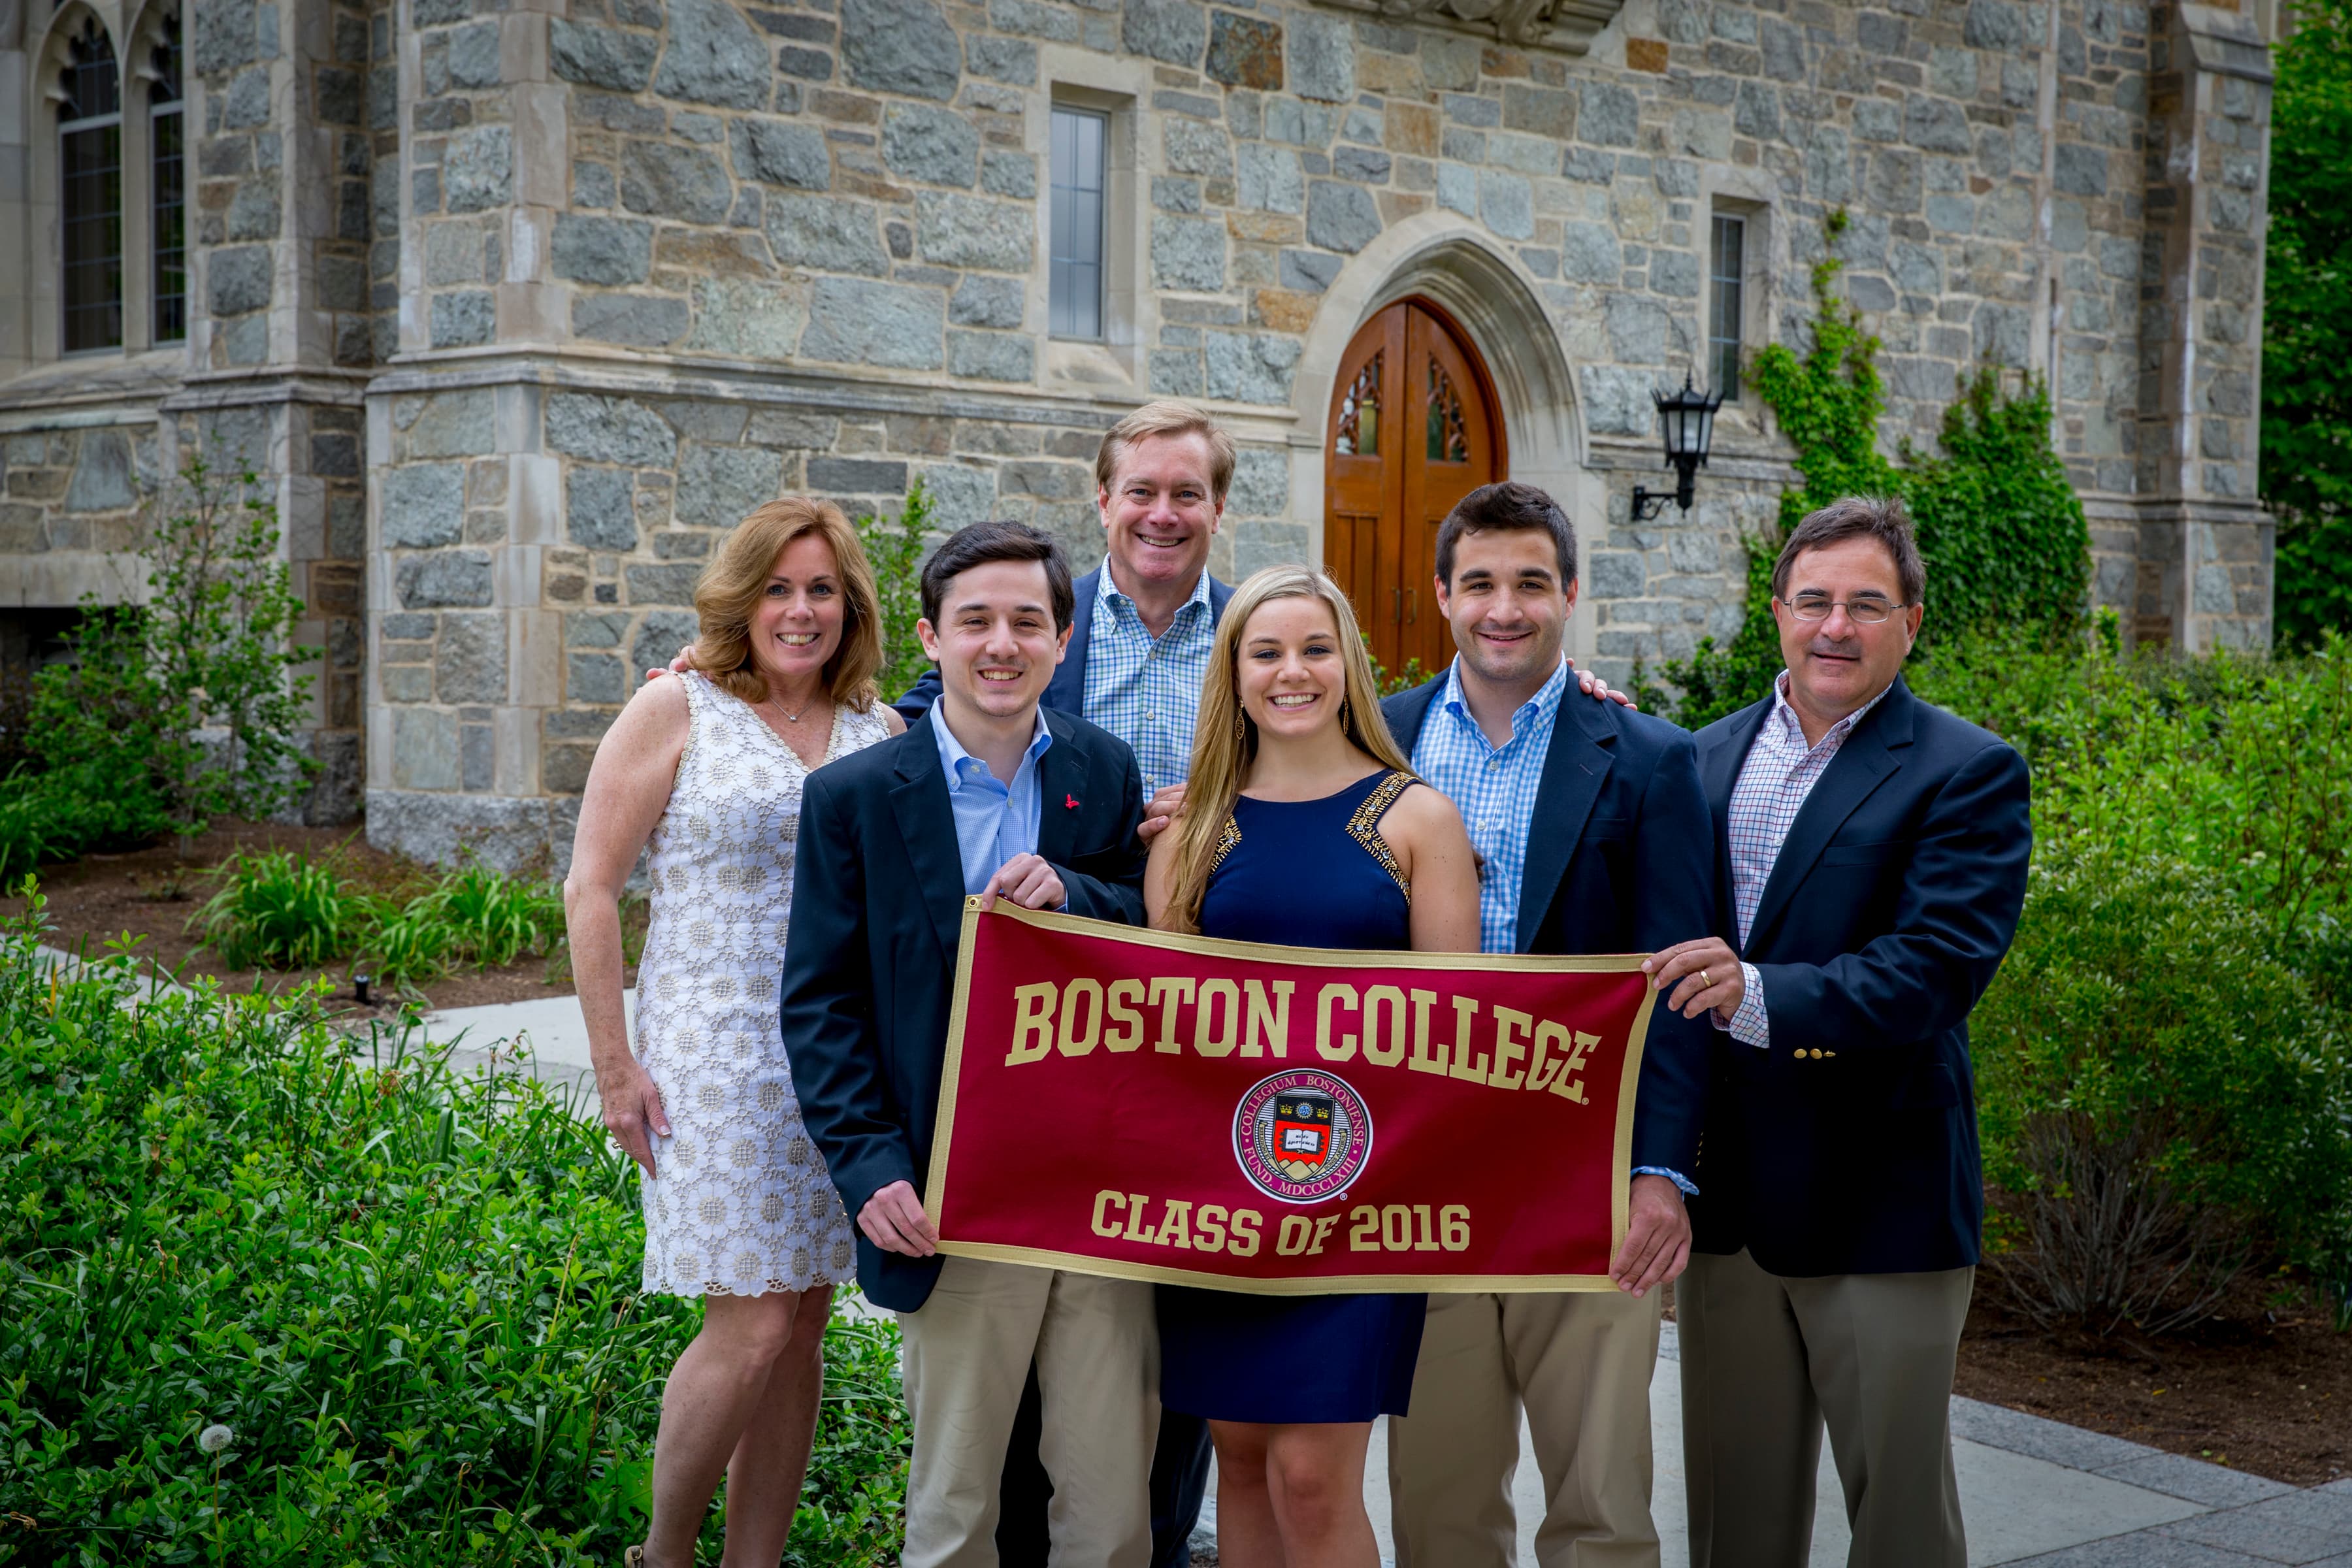 a family holding a Boston College class of 2016 sign